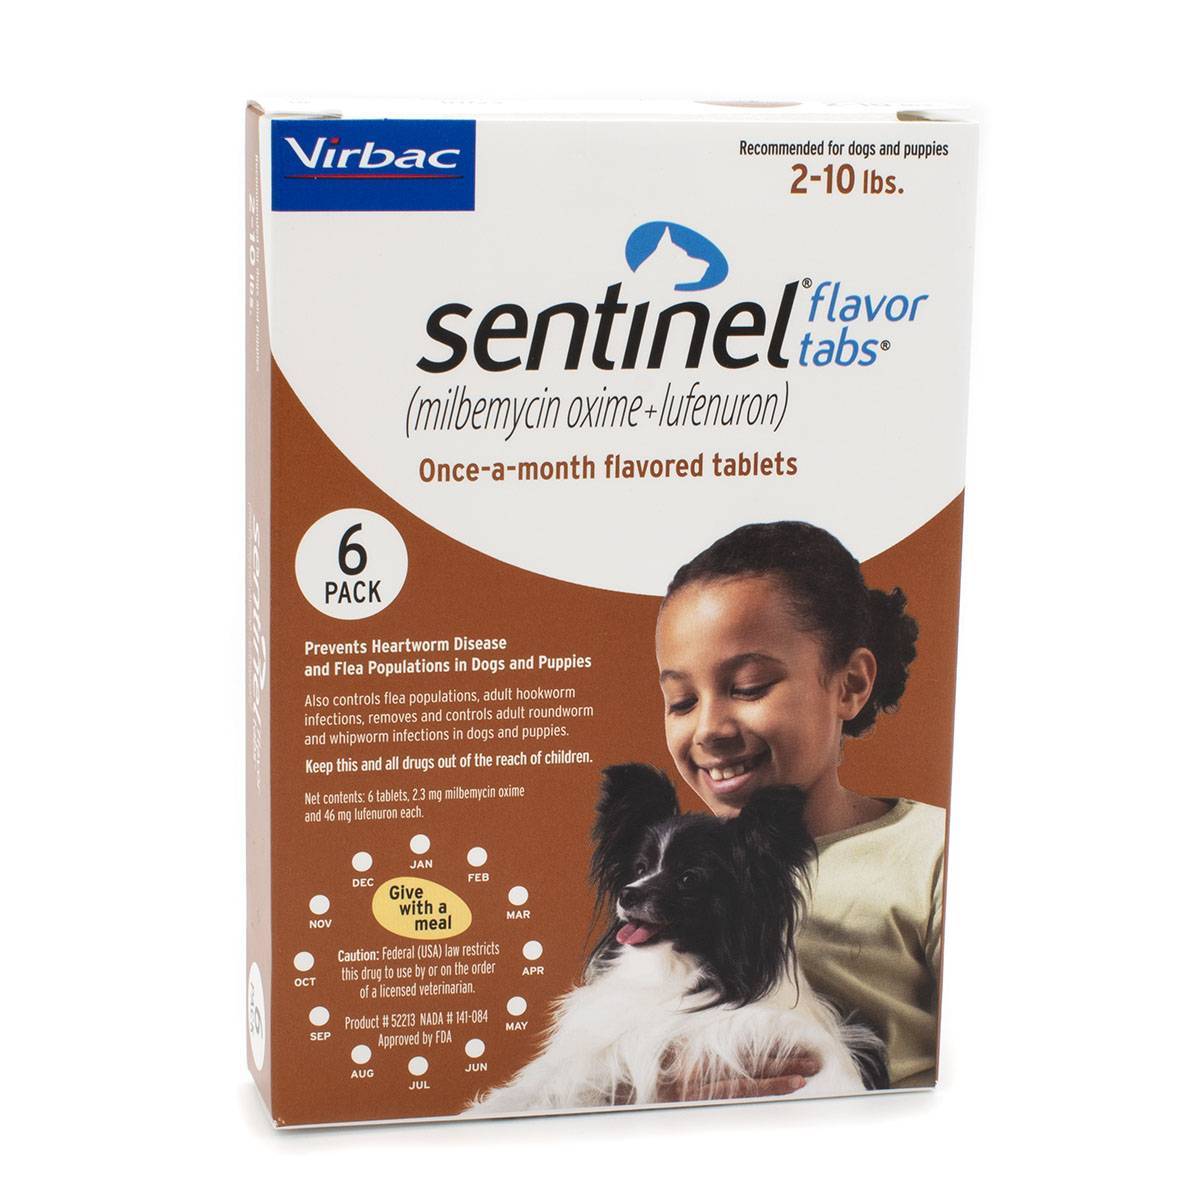 sentinel-flavor-tabs-dog-heartworm-vetrxdirect-pharmacy-51-100-lbs-12-month-supply